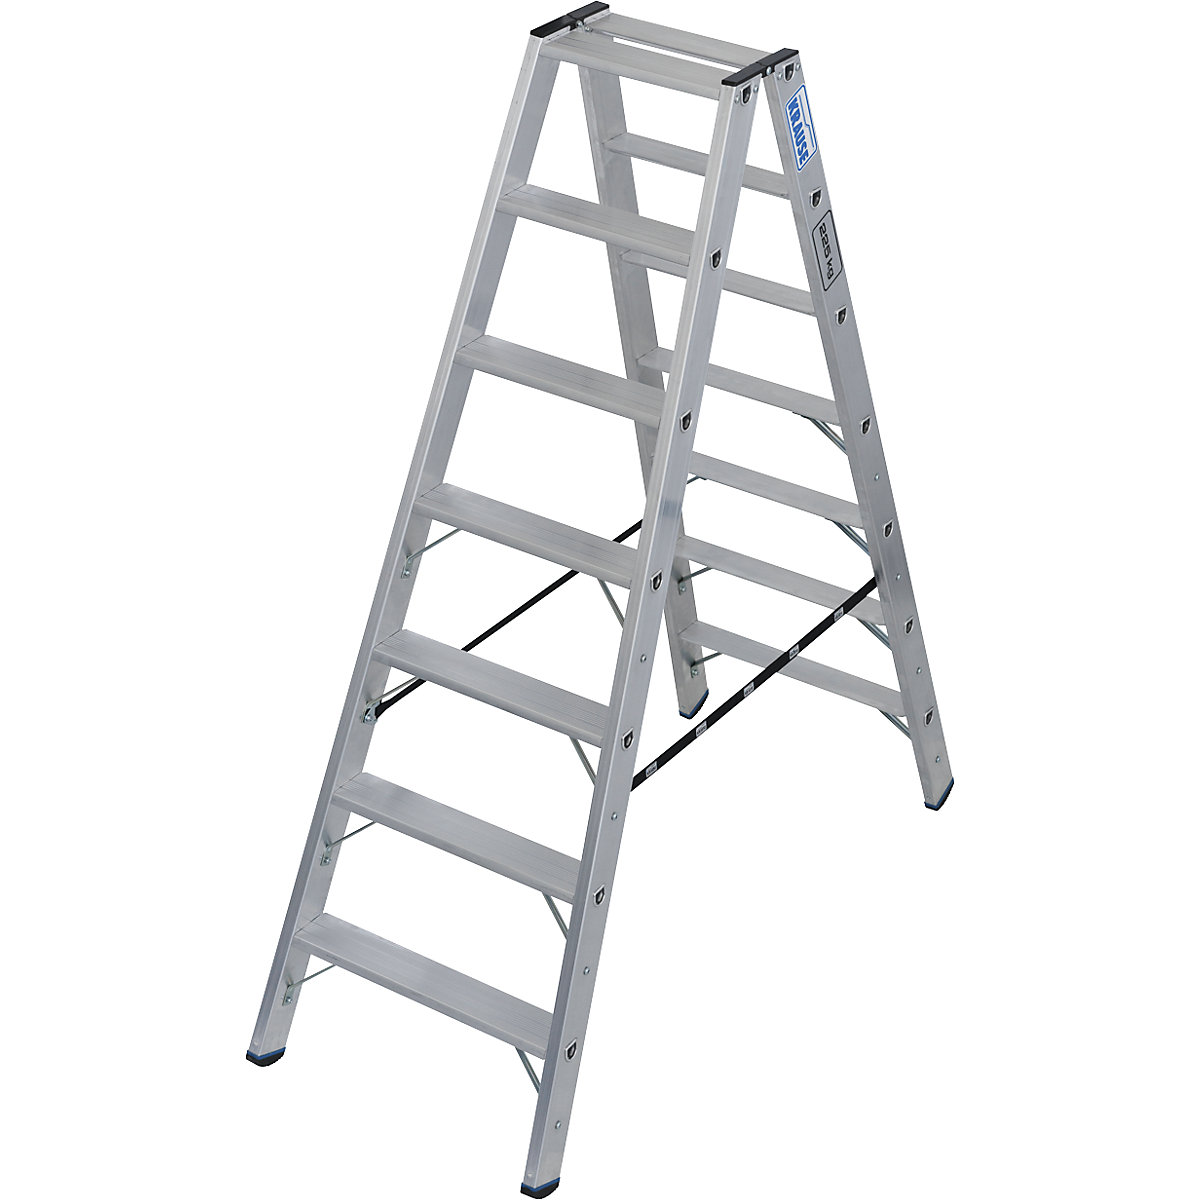 Heavy duty step ladder – KRAUSE, double sided access, up to 225 kg, 2x7 steps-4